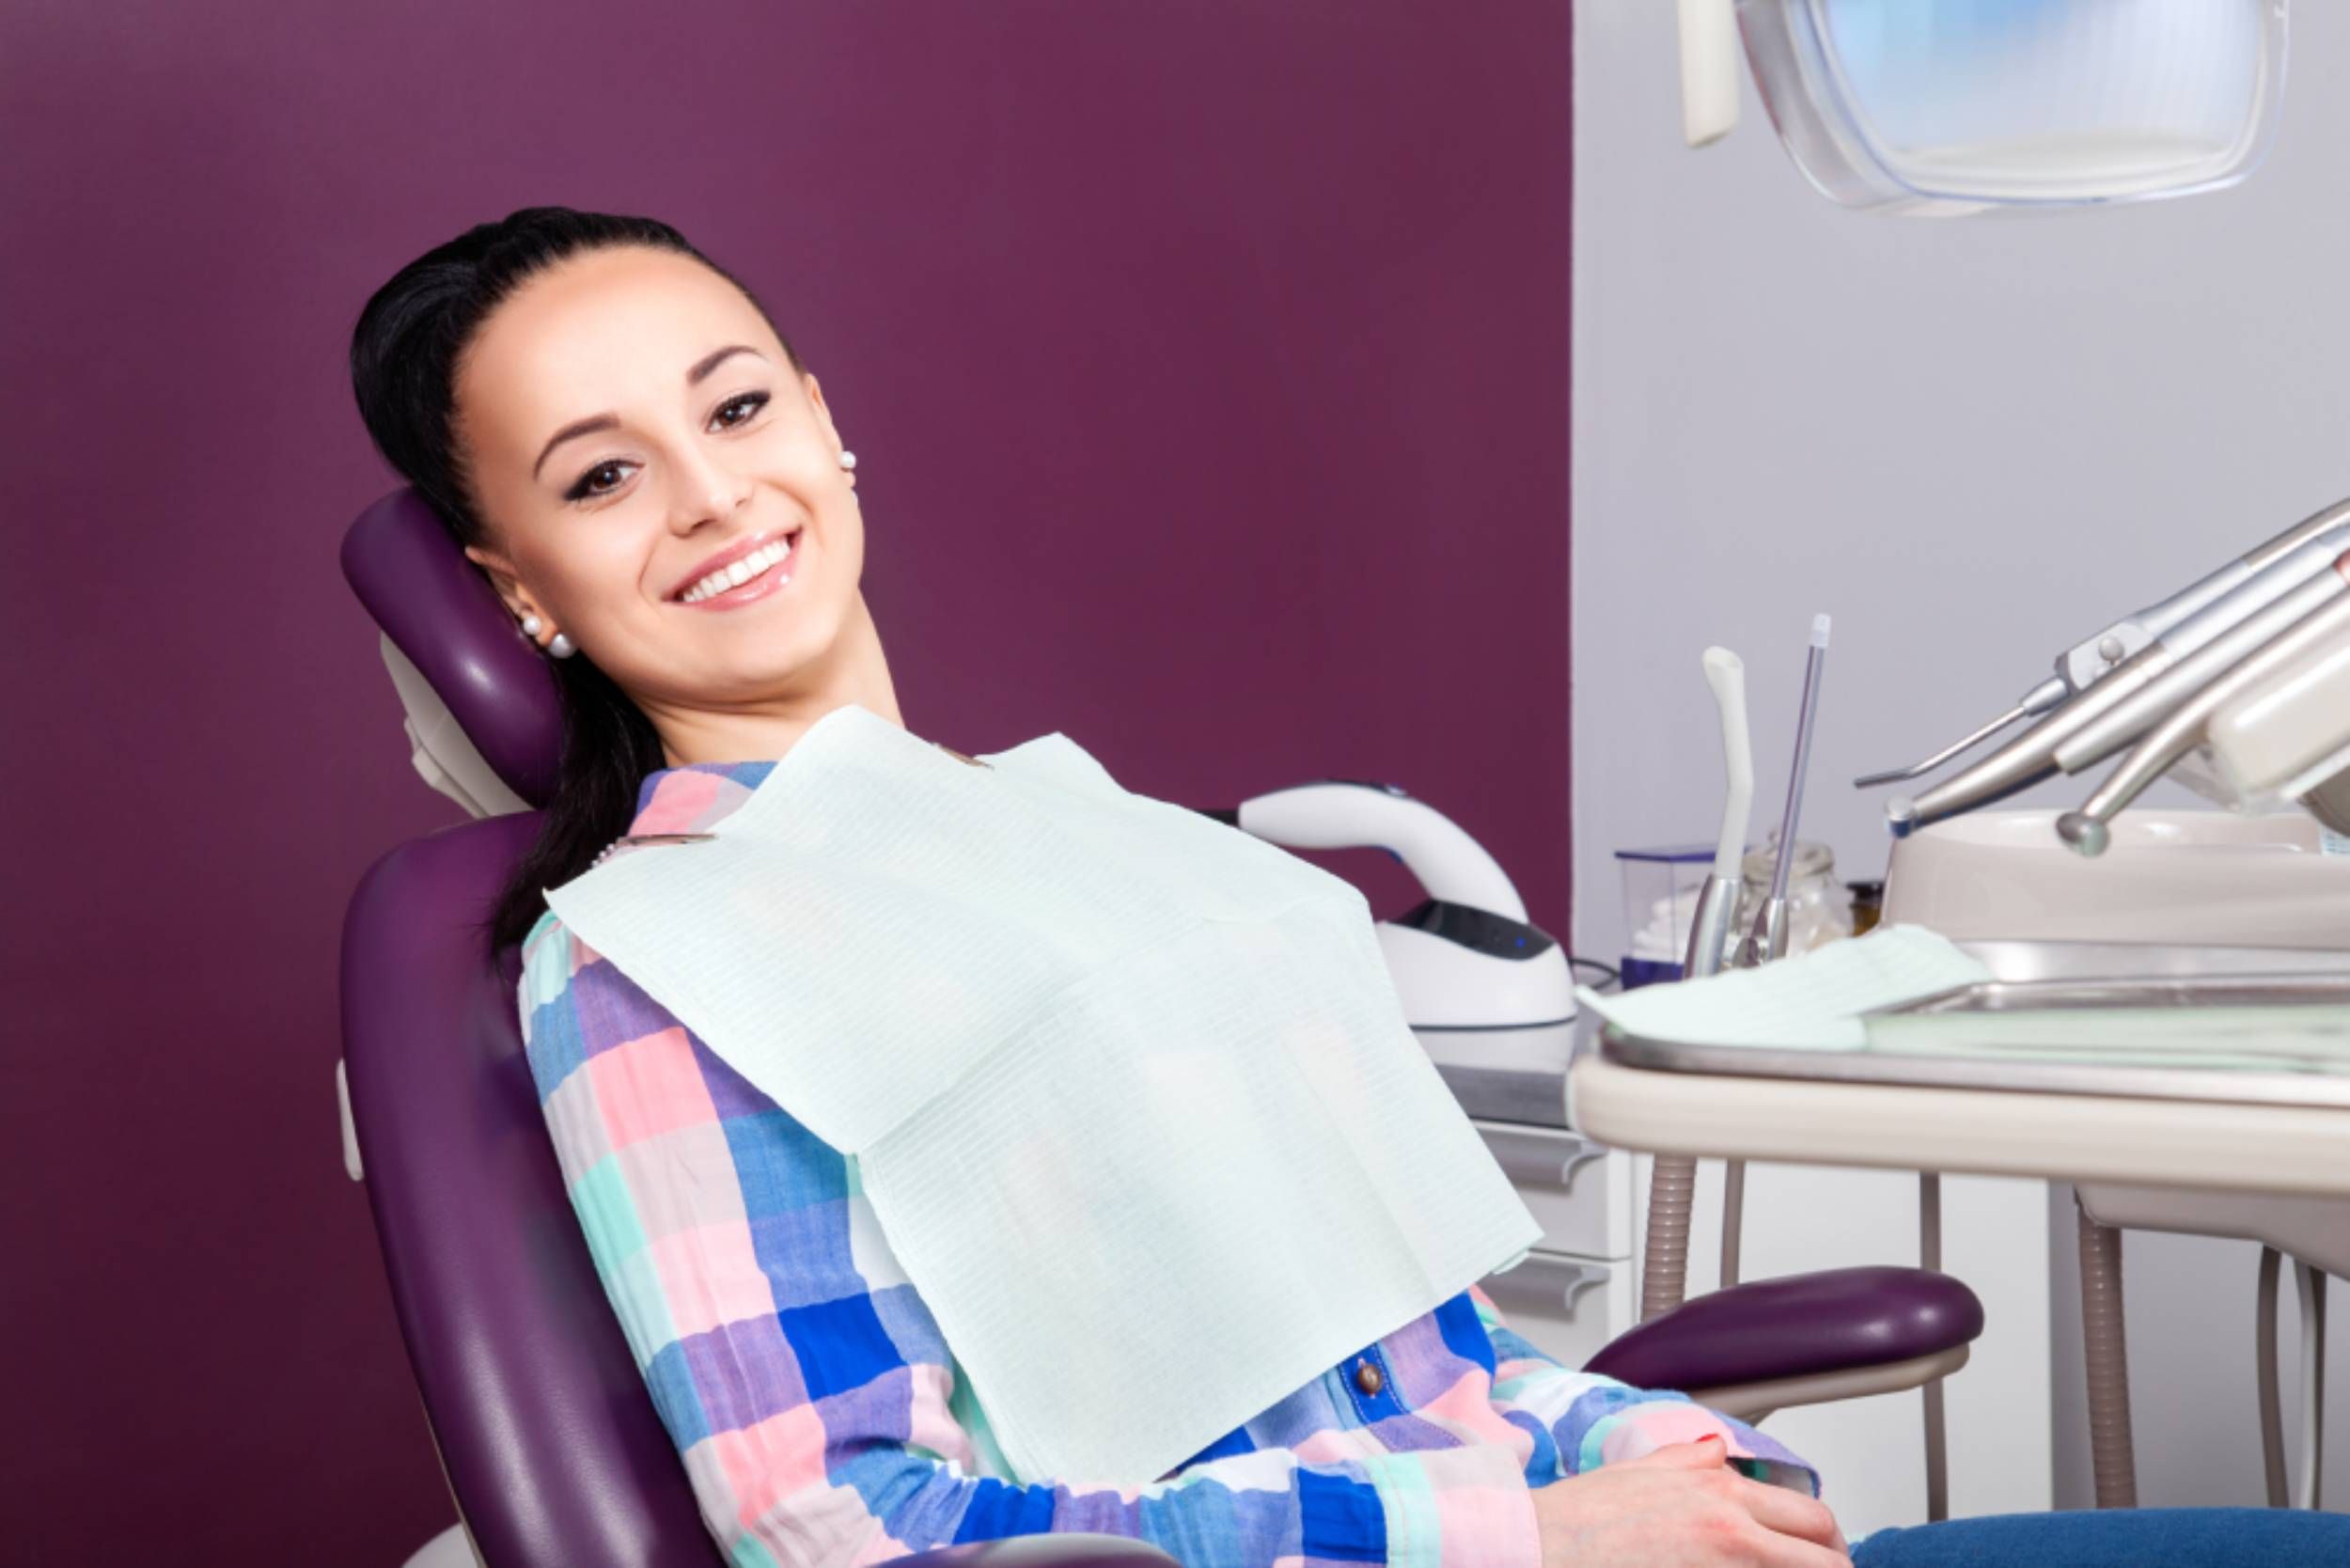 Stay on top of dental care! How do I prevent plaque formation after dental routine?